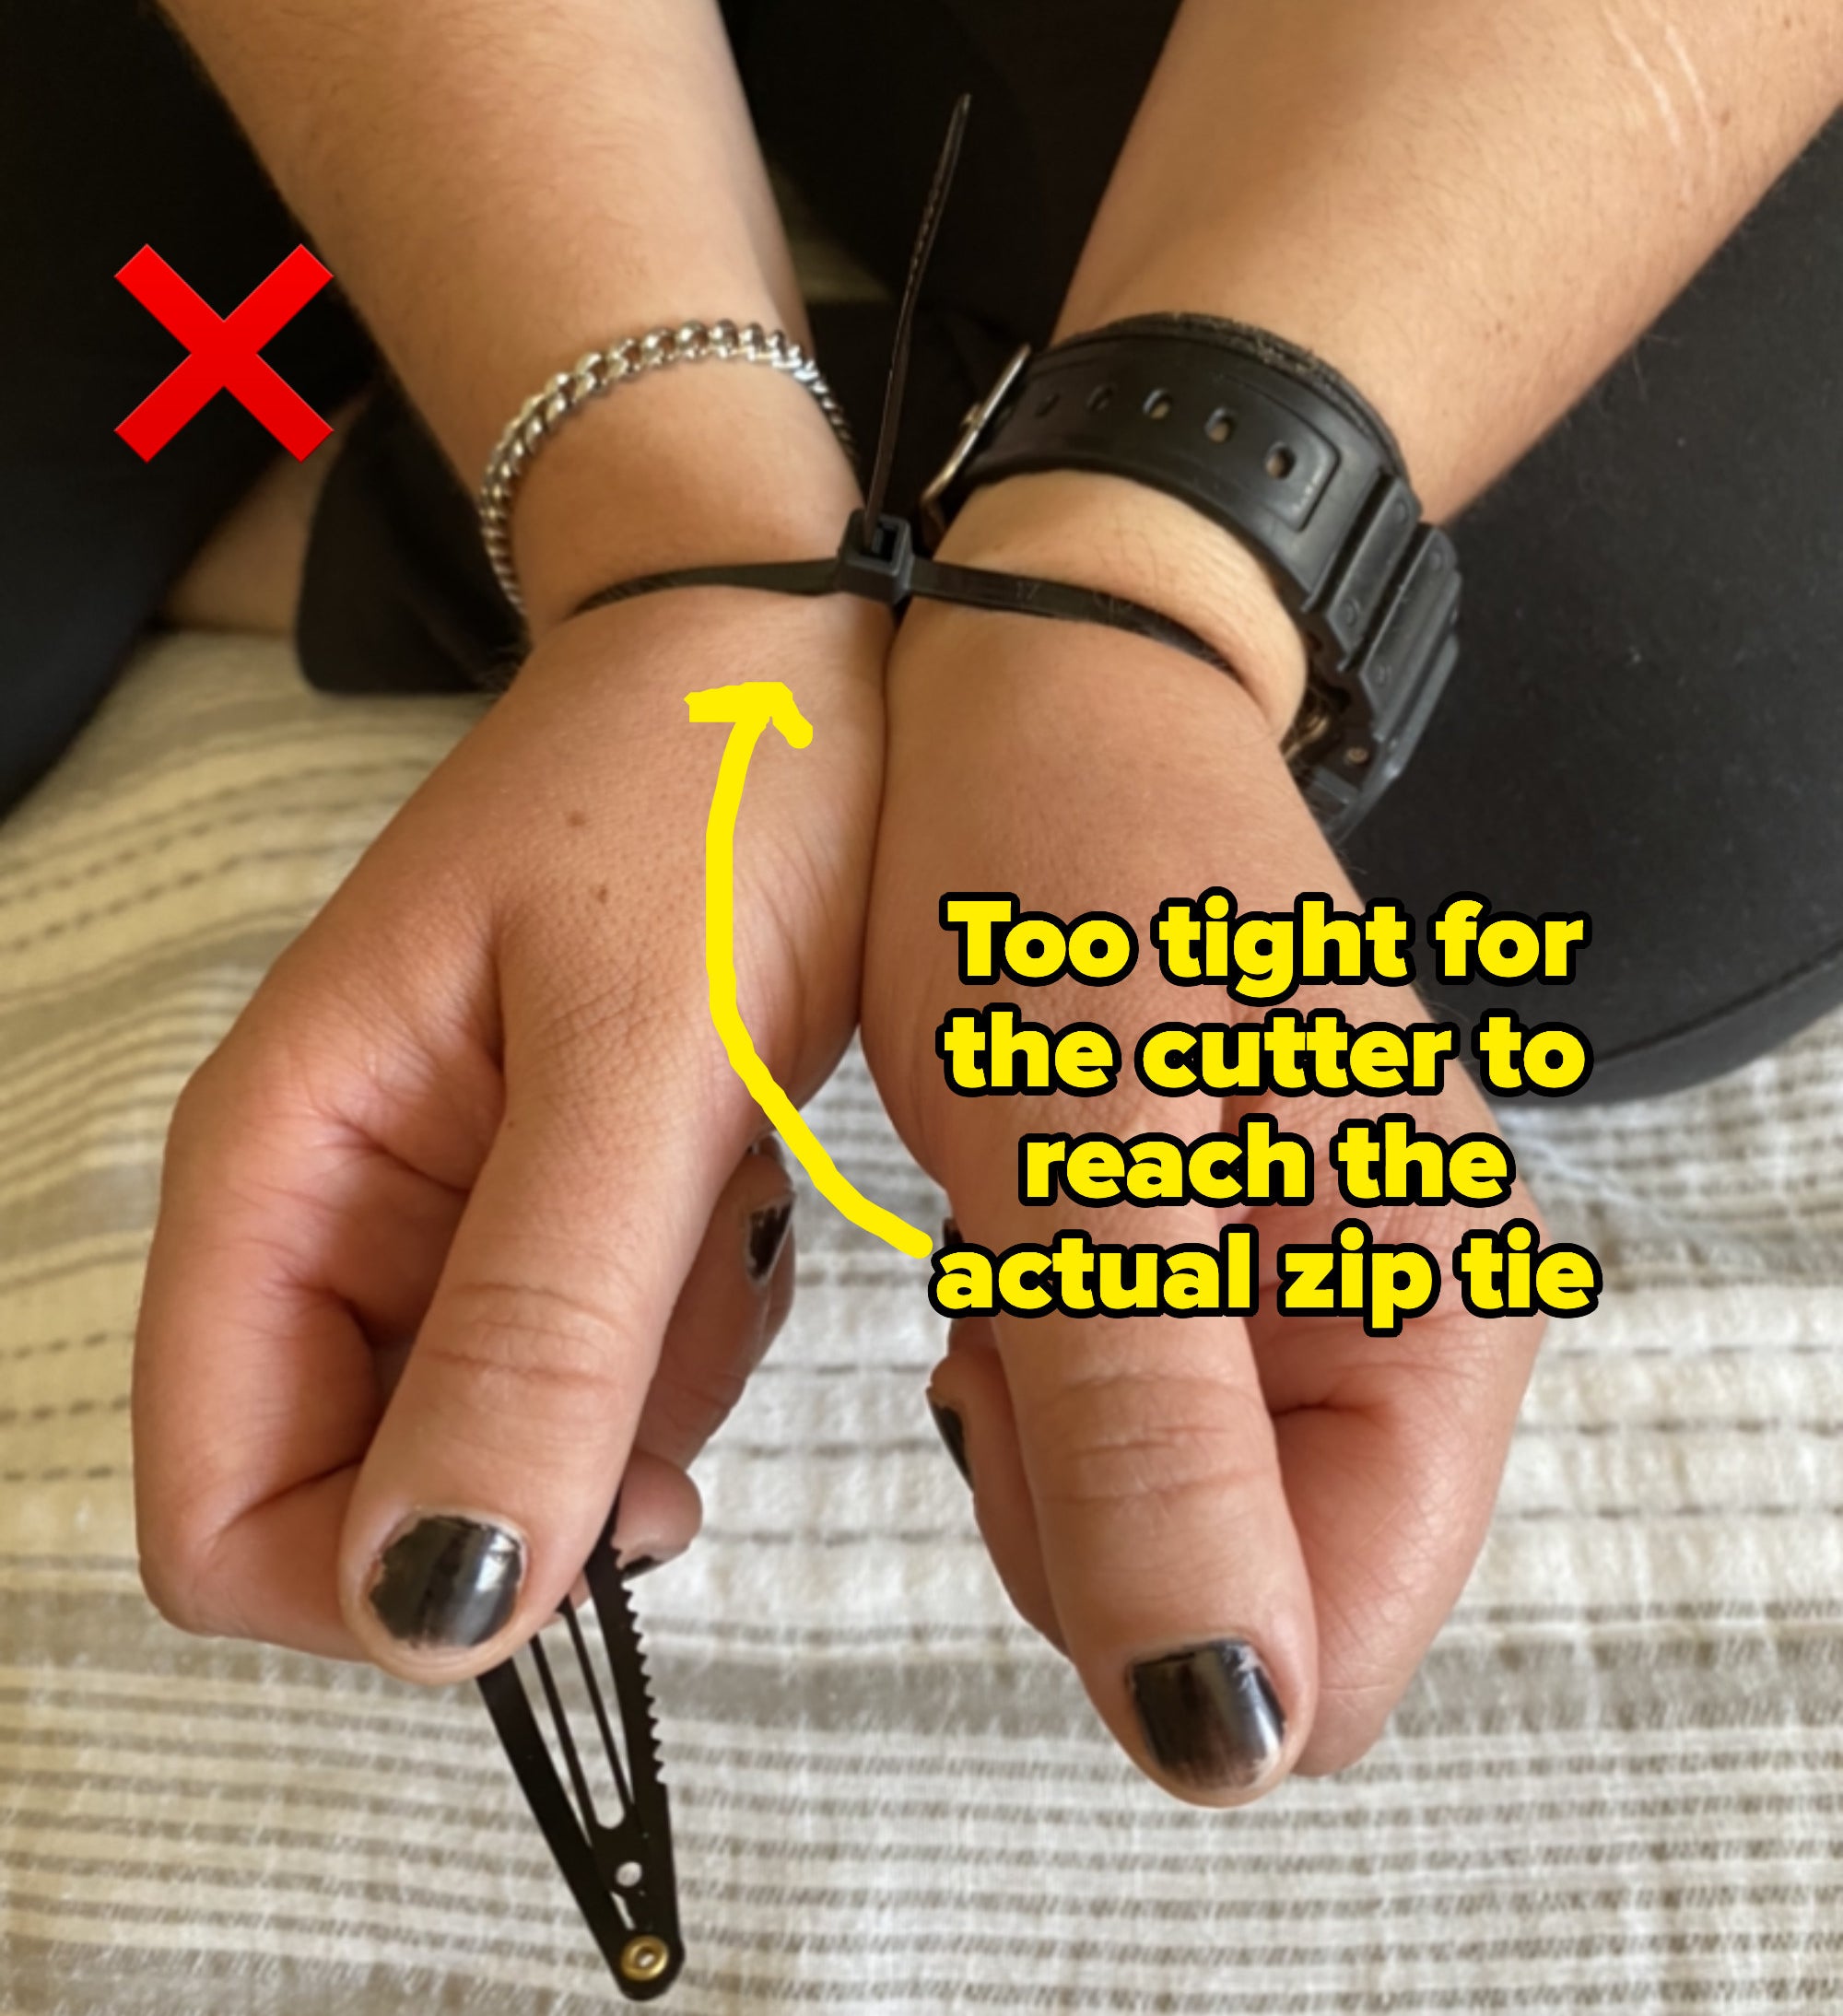 an arrow pointing to the zip ties with text: too tight for the cutter to reach the actual zip tie